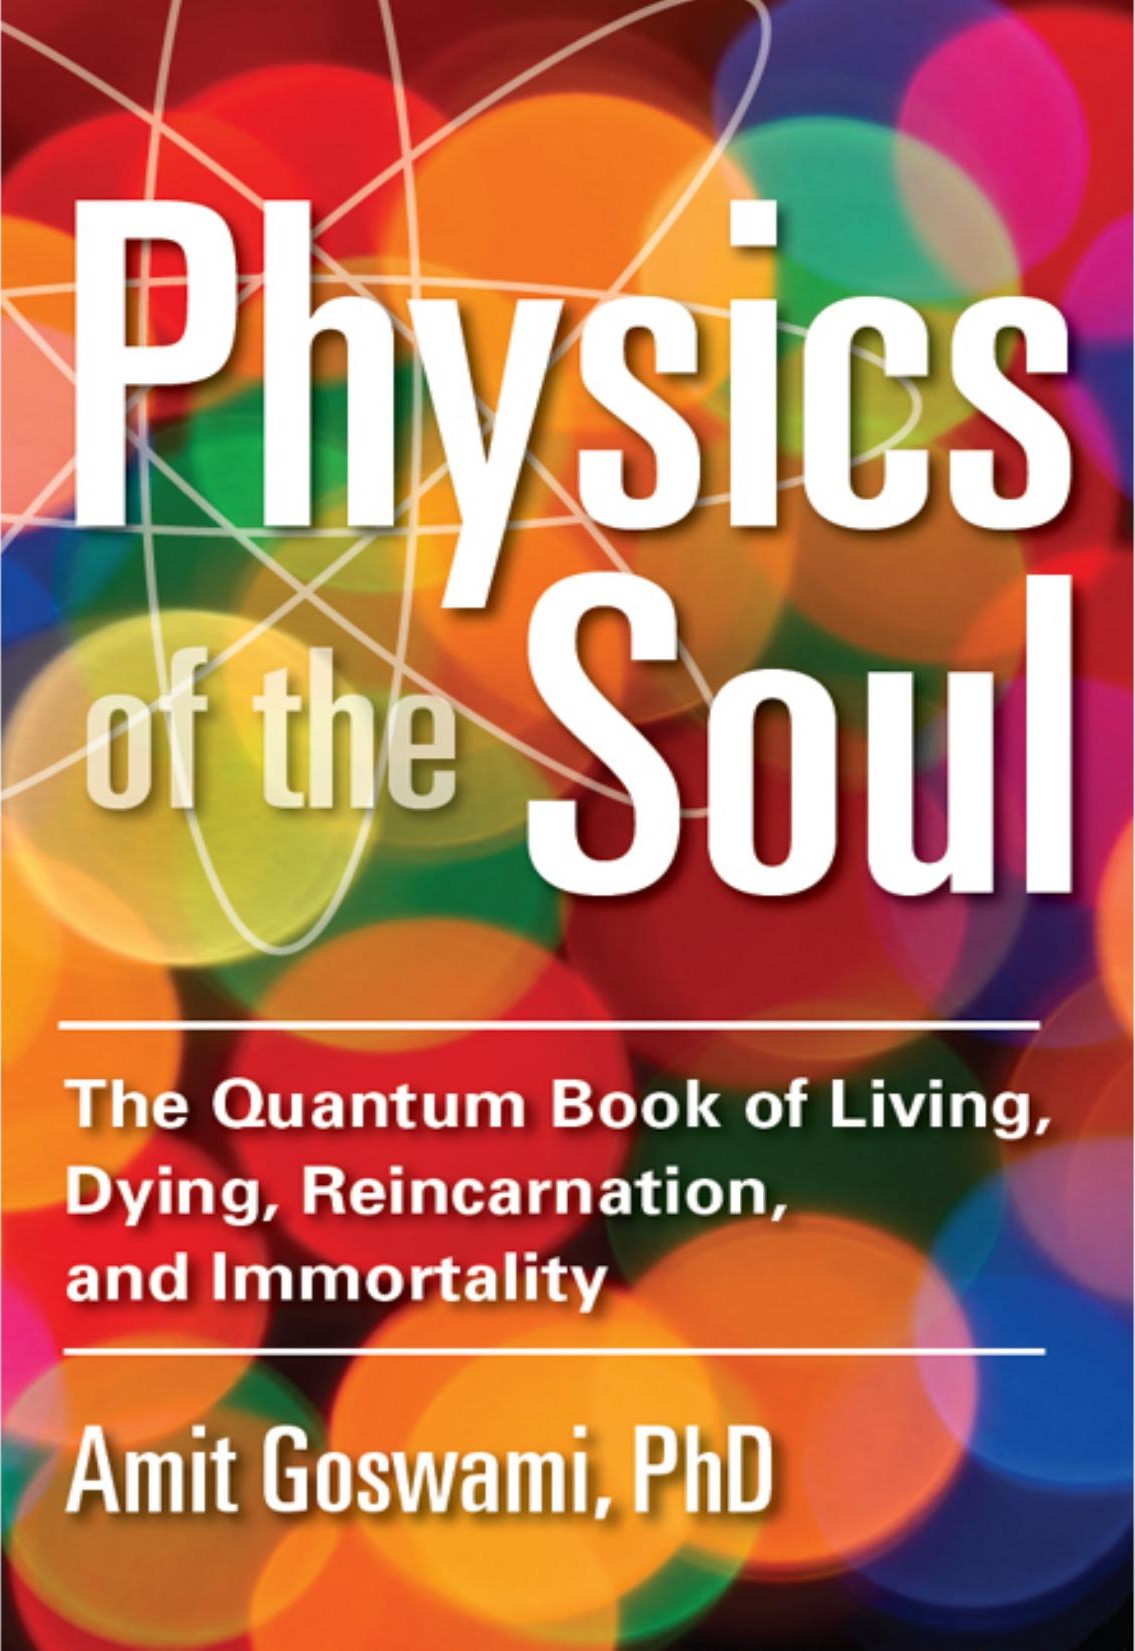 Physics of the Soul: The Quantum Book of Living, Dying, Reincarnation, and Immortality